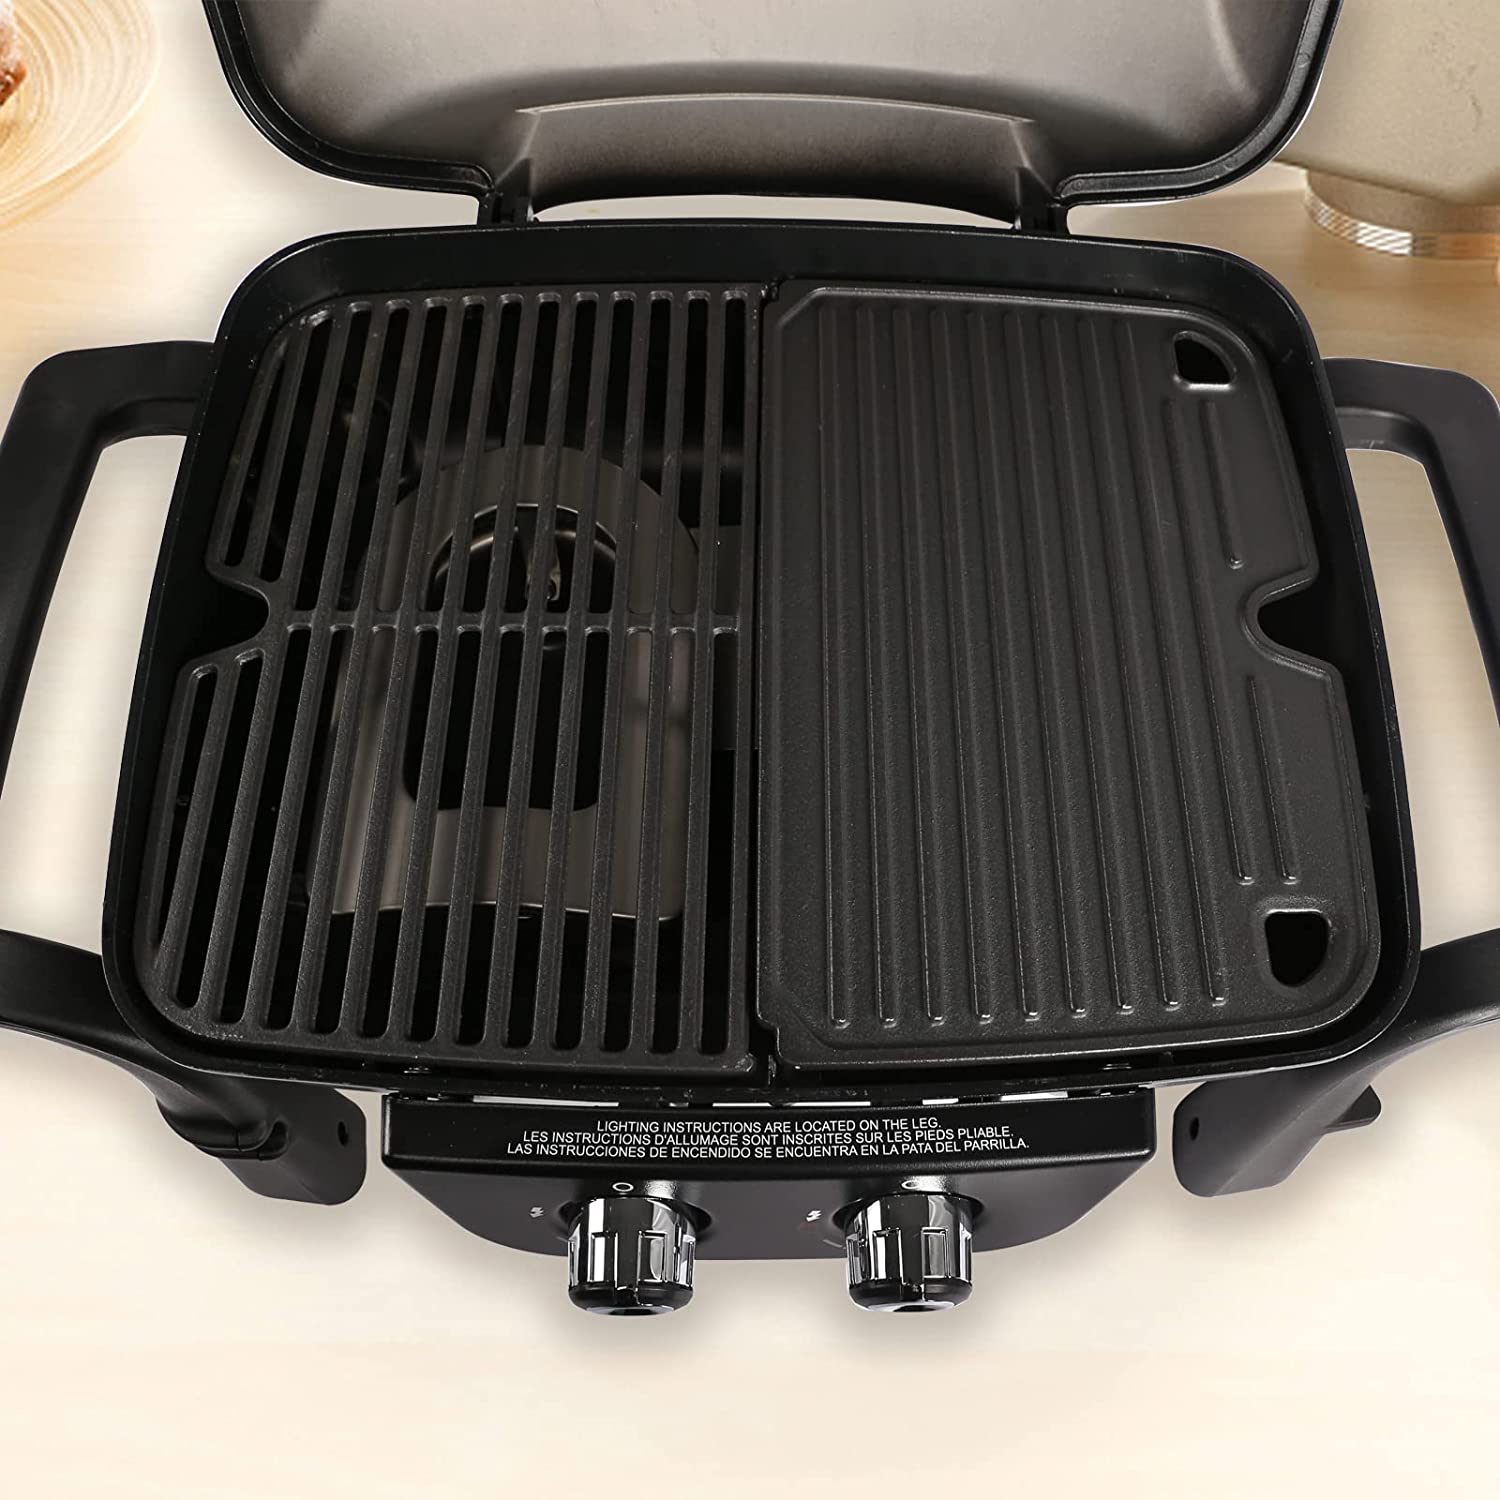 Nexgrill Outdoor Cooking 2 Burner Tabletop Griddle, Cast Iron Griddle Top for